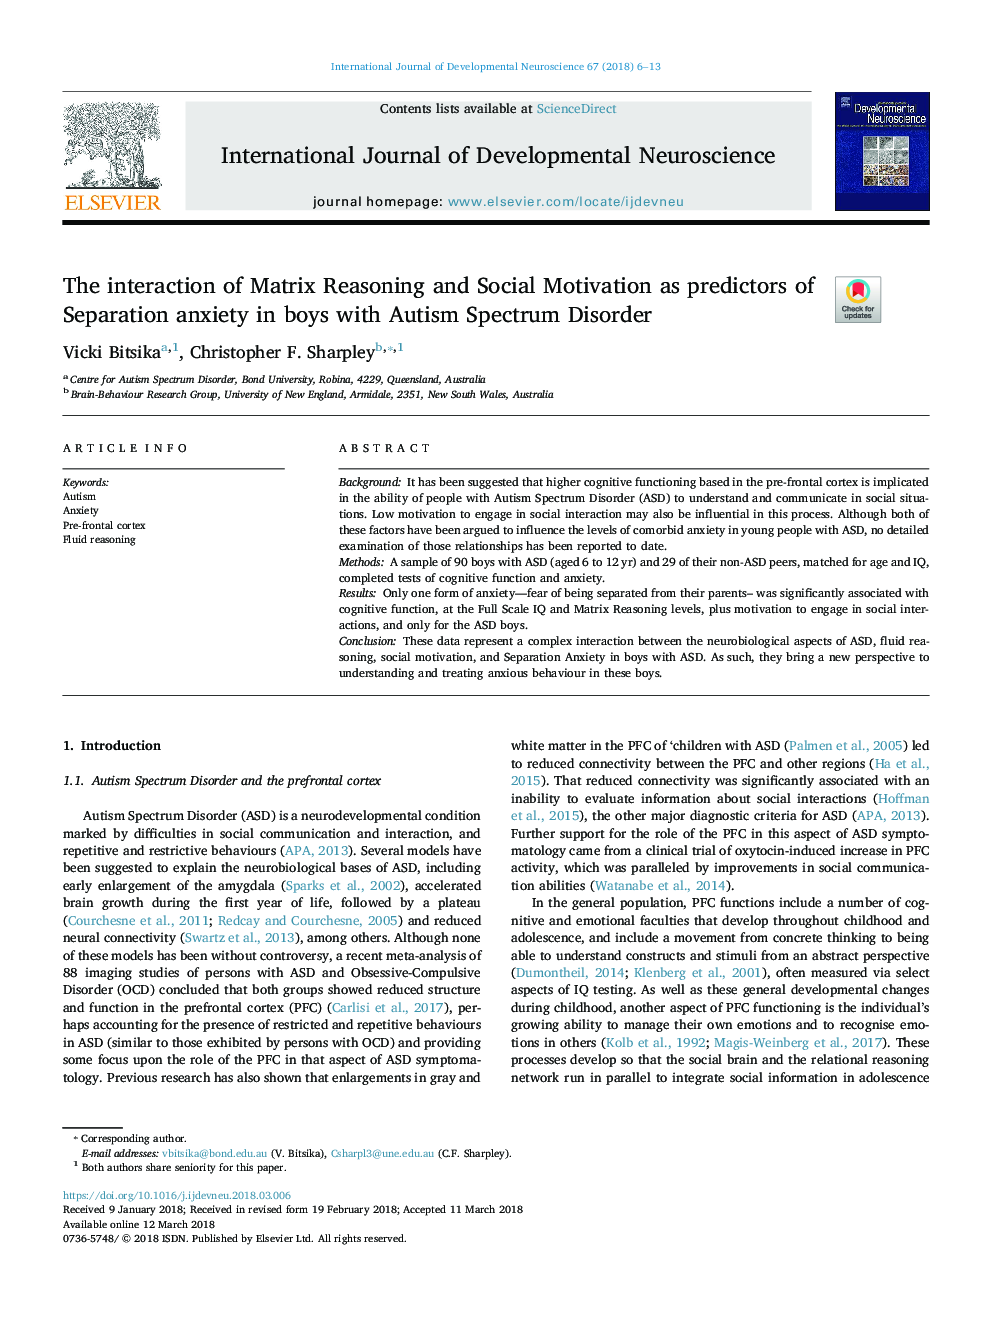 The interaction of Matrix Reasoning and Social Motivation as predictors of Separation anxiety in boys with Autism Spectrum Disorder